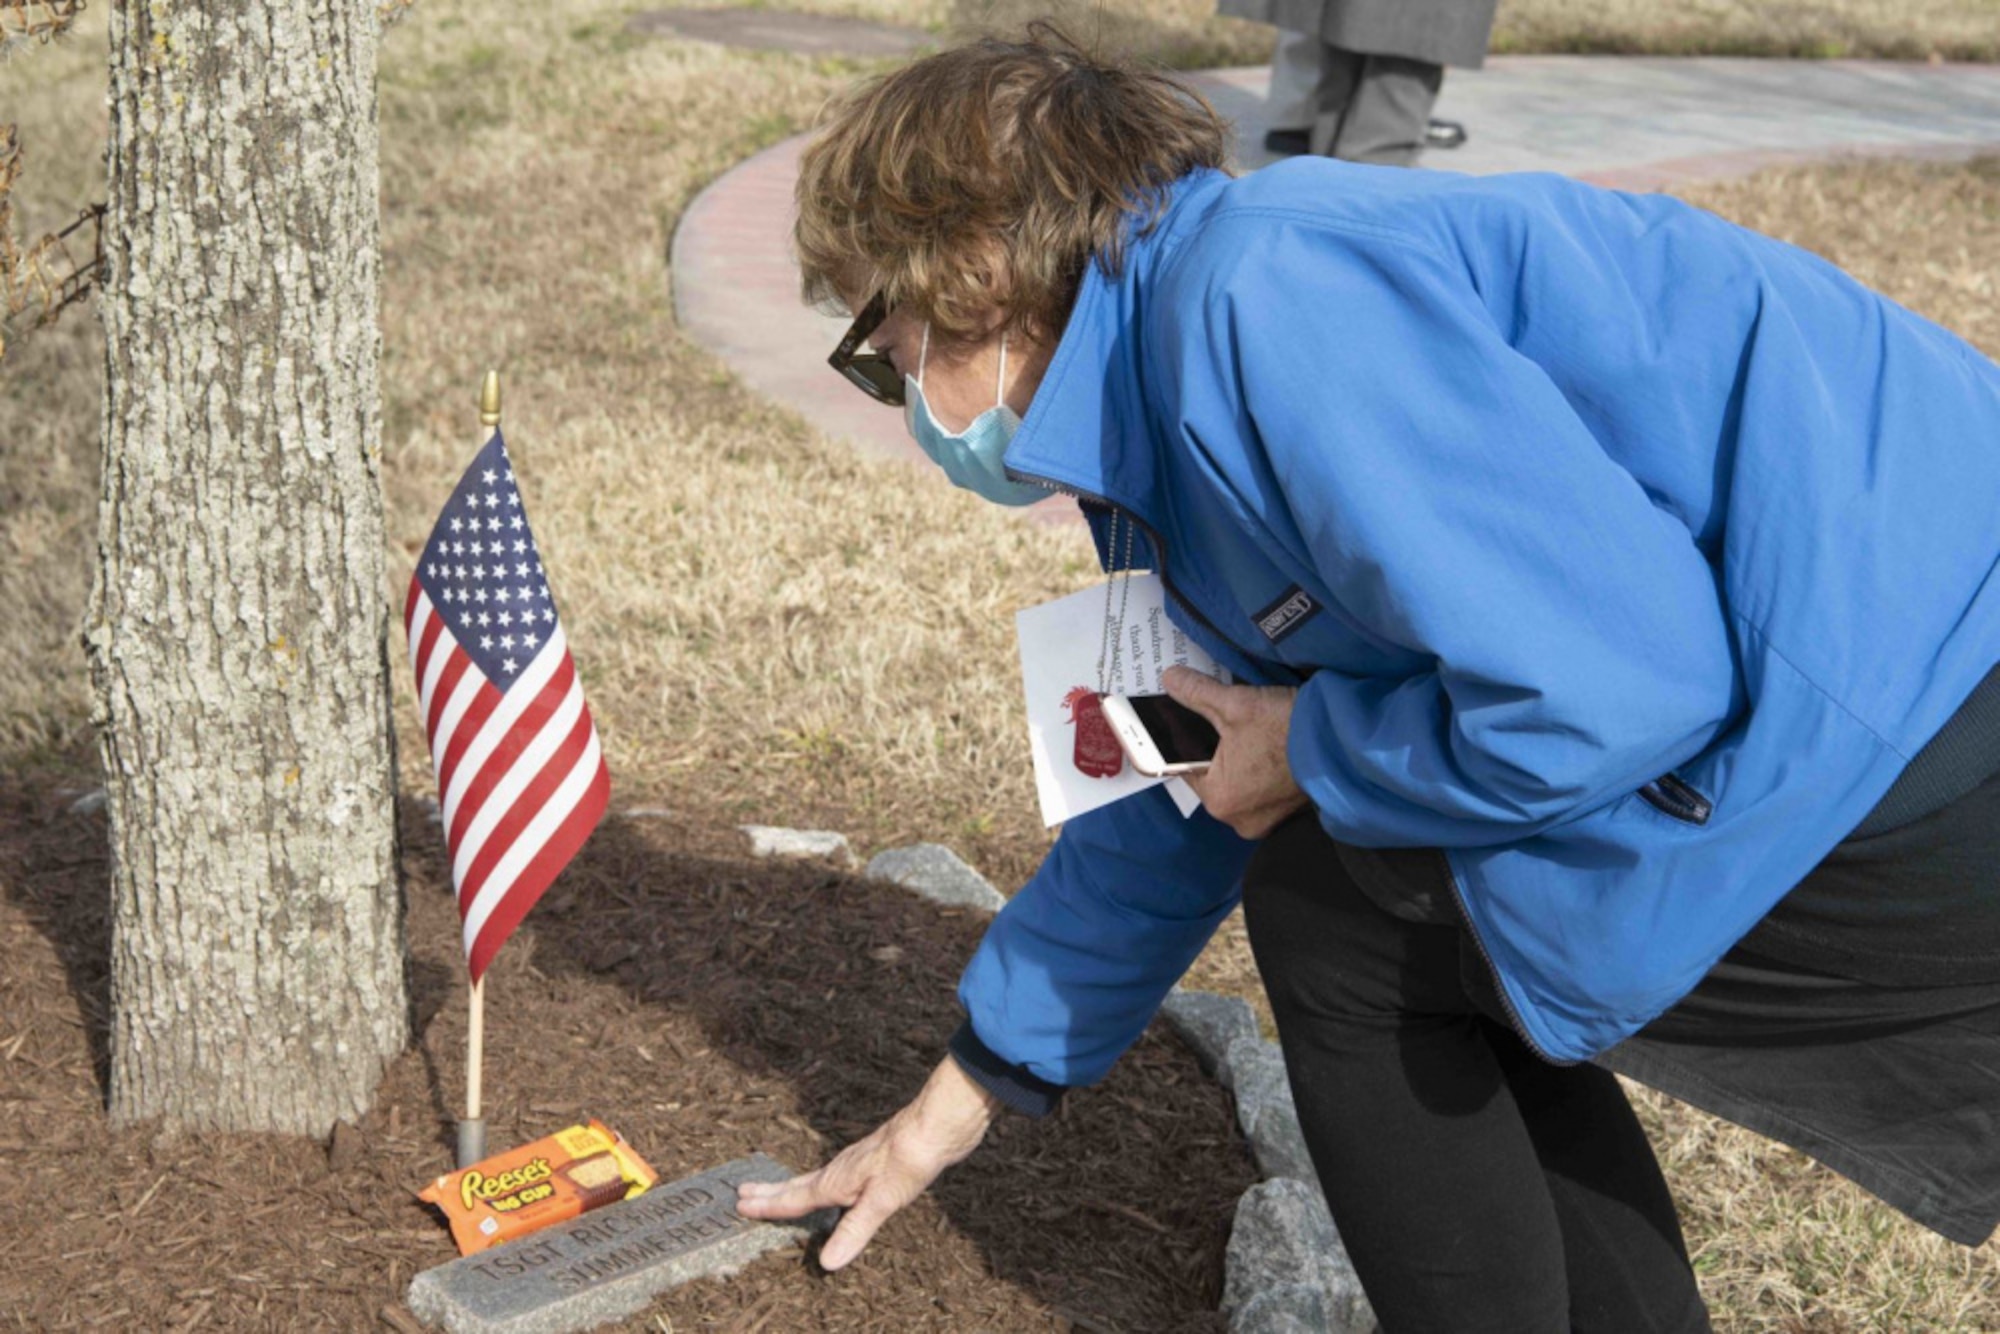 A woman touches a plaque in the ground under a tree